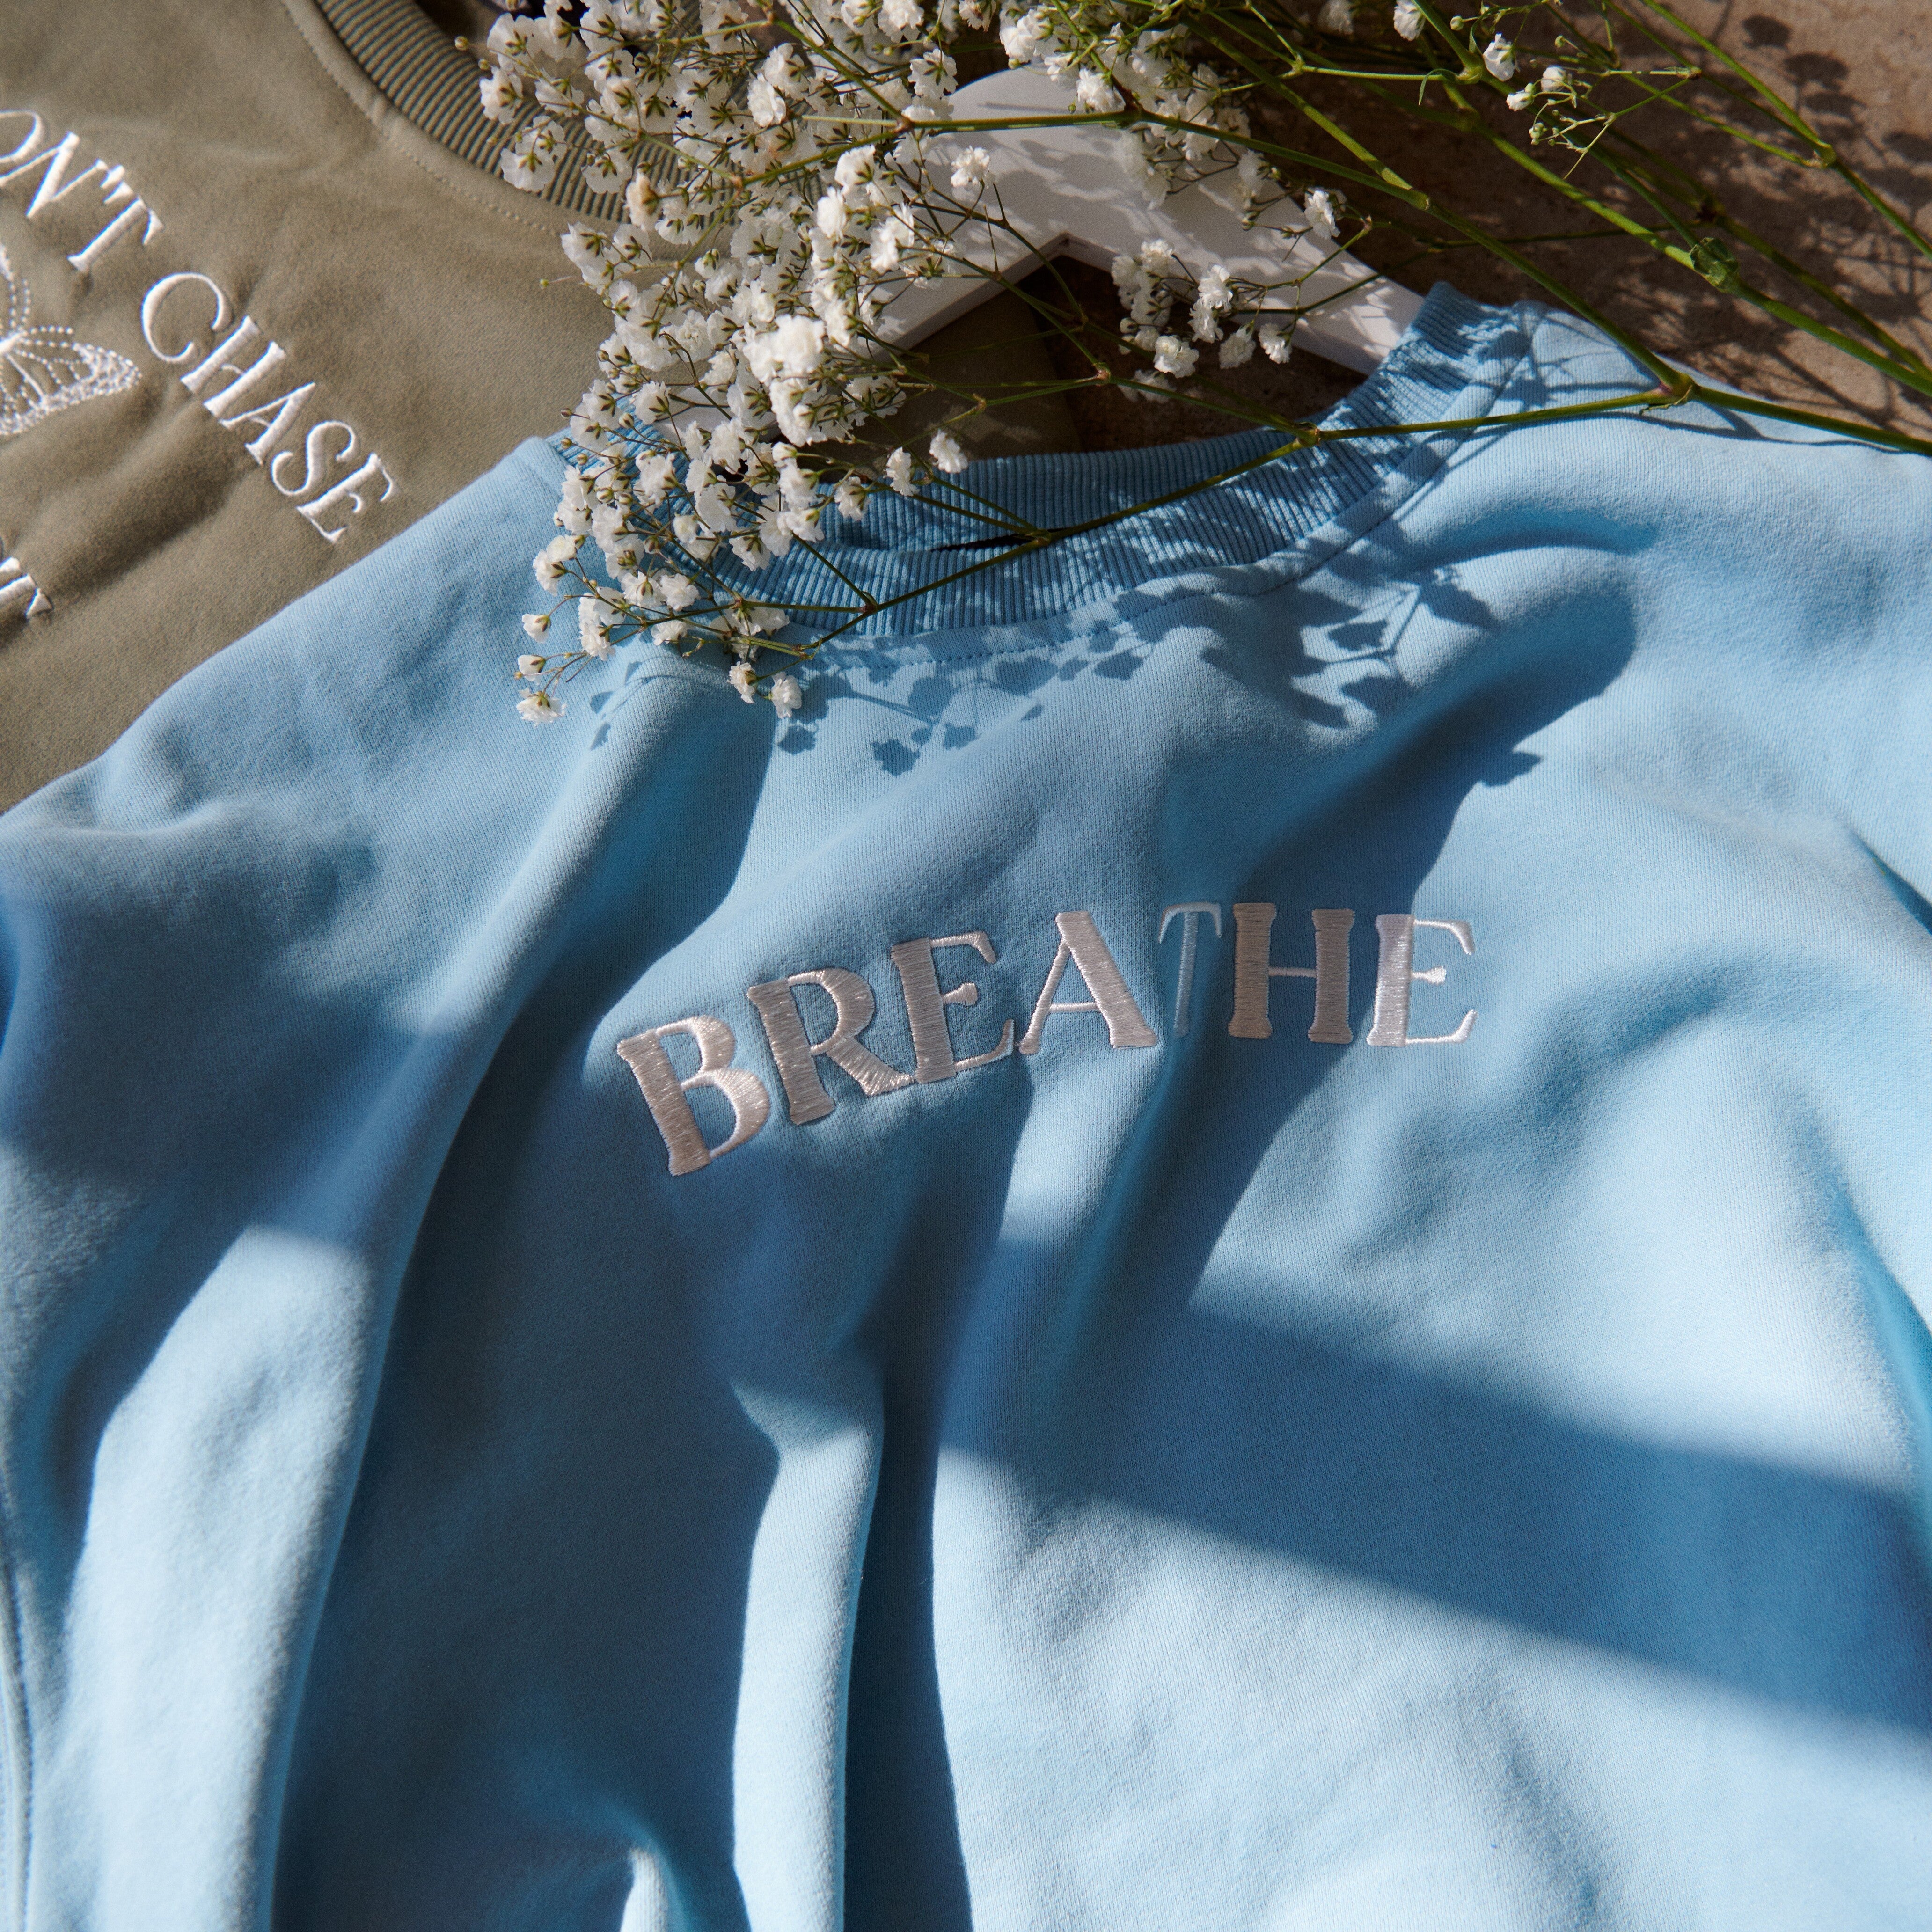 Breathe (one day at a time) Sweatshirt - Emacity Threads